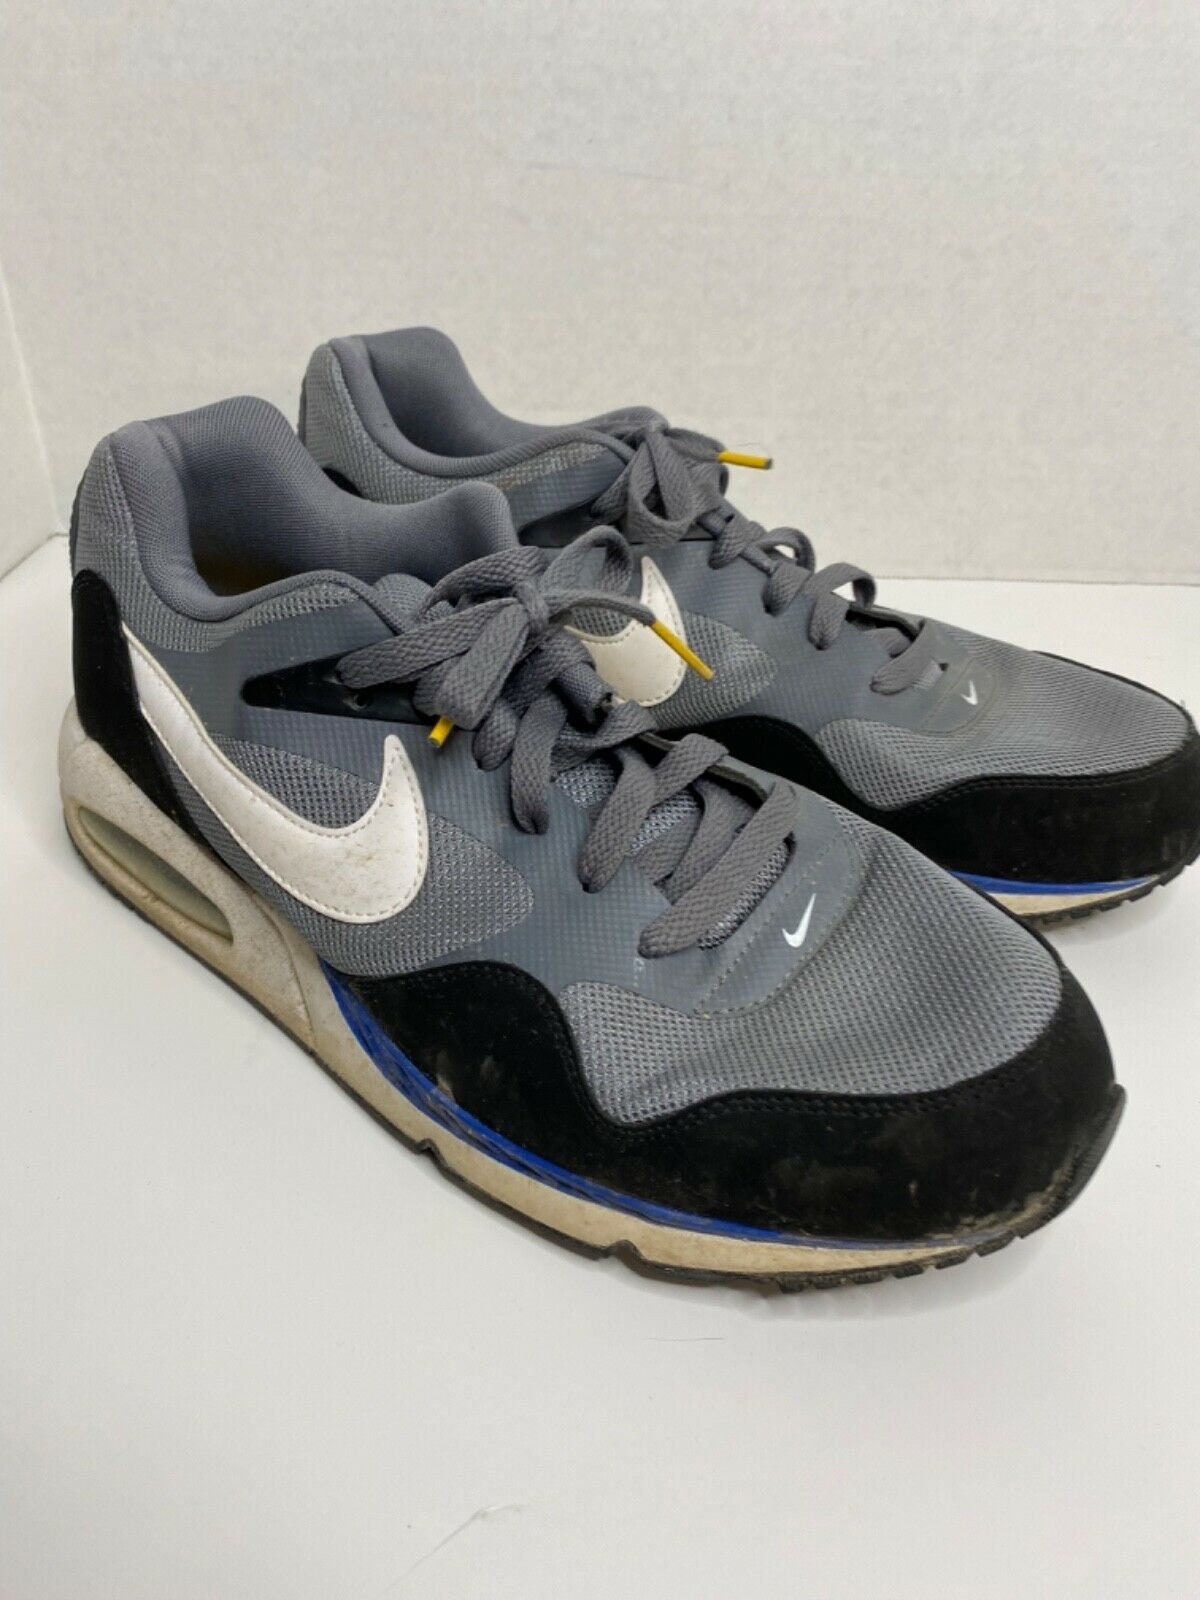 2012 nike air max livestrong correlate laf size 11.5 blue gray - Etsy  Österreich